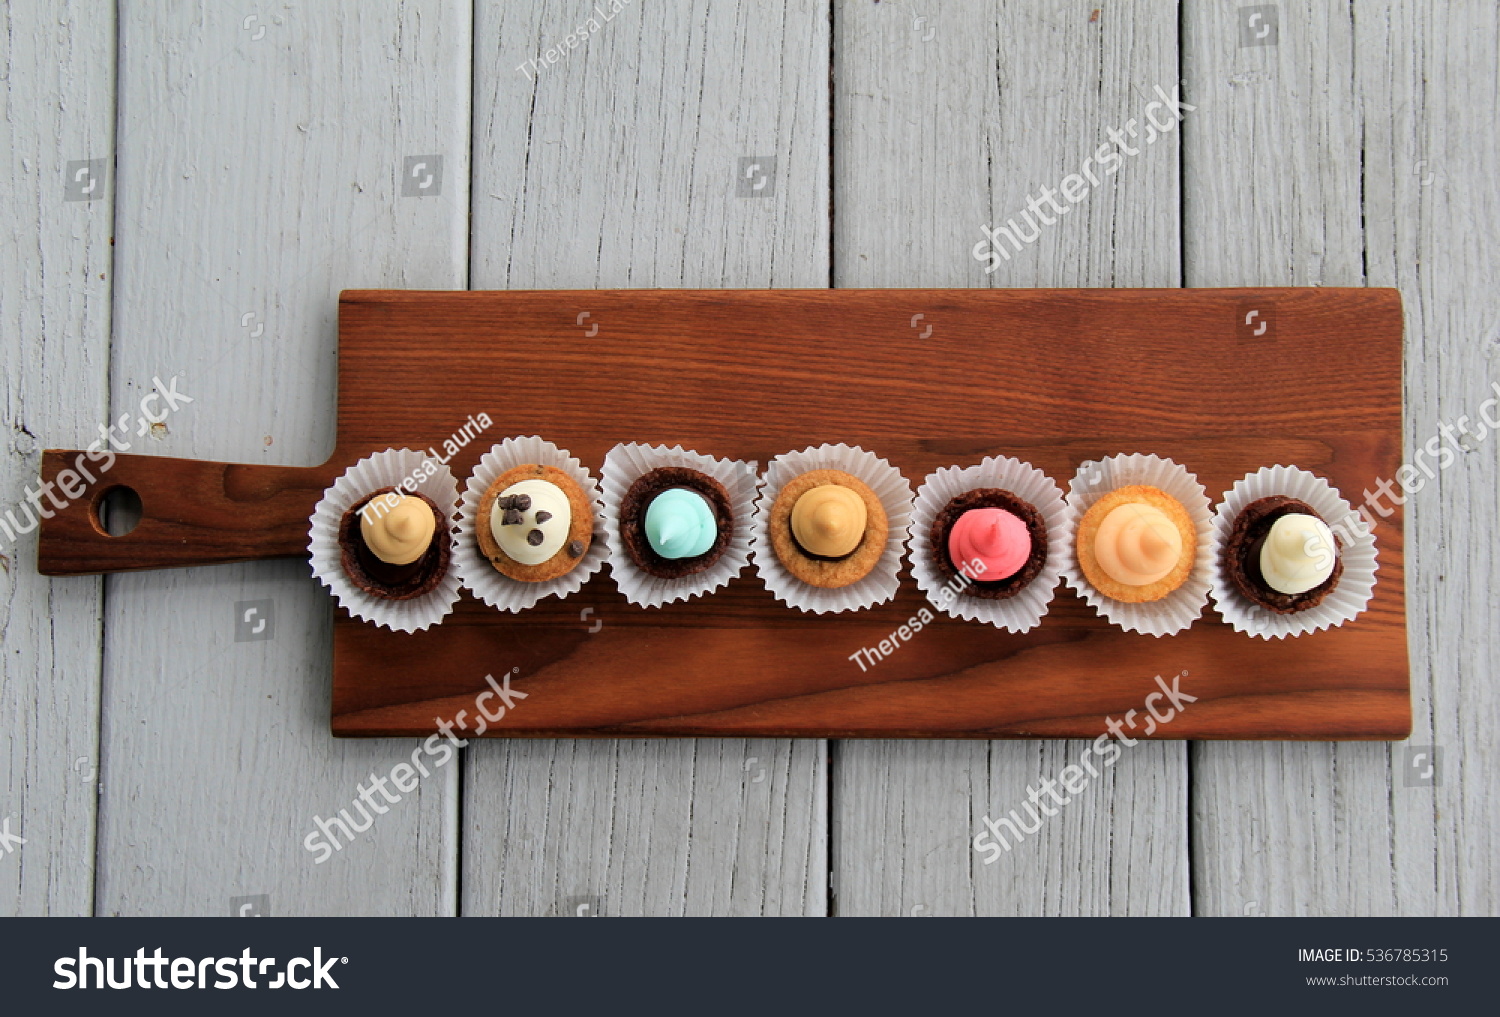 Seven bite-sized treats for dessert, offered in little muffin tins and set on wood background. #536785315